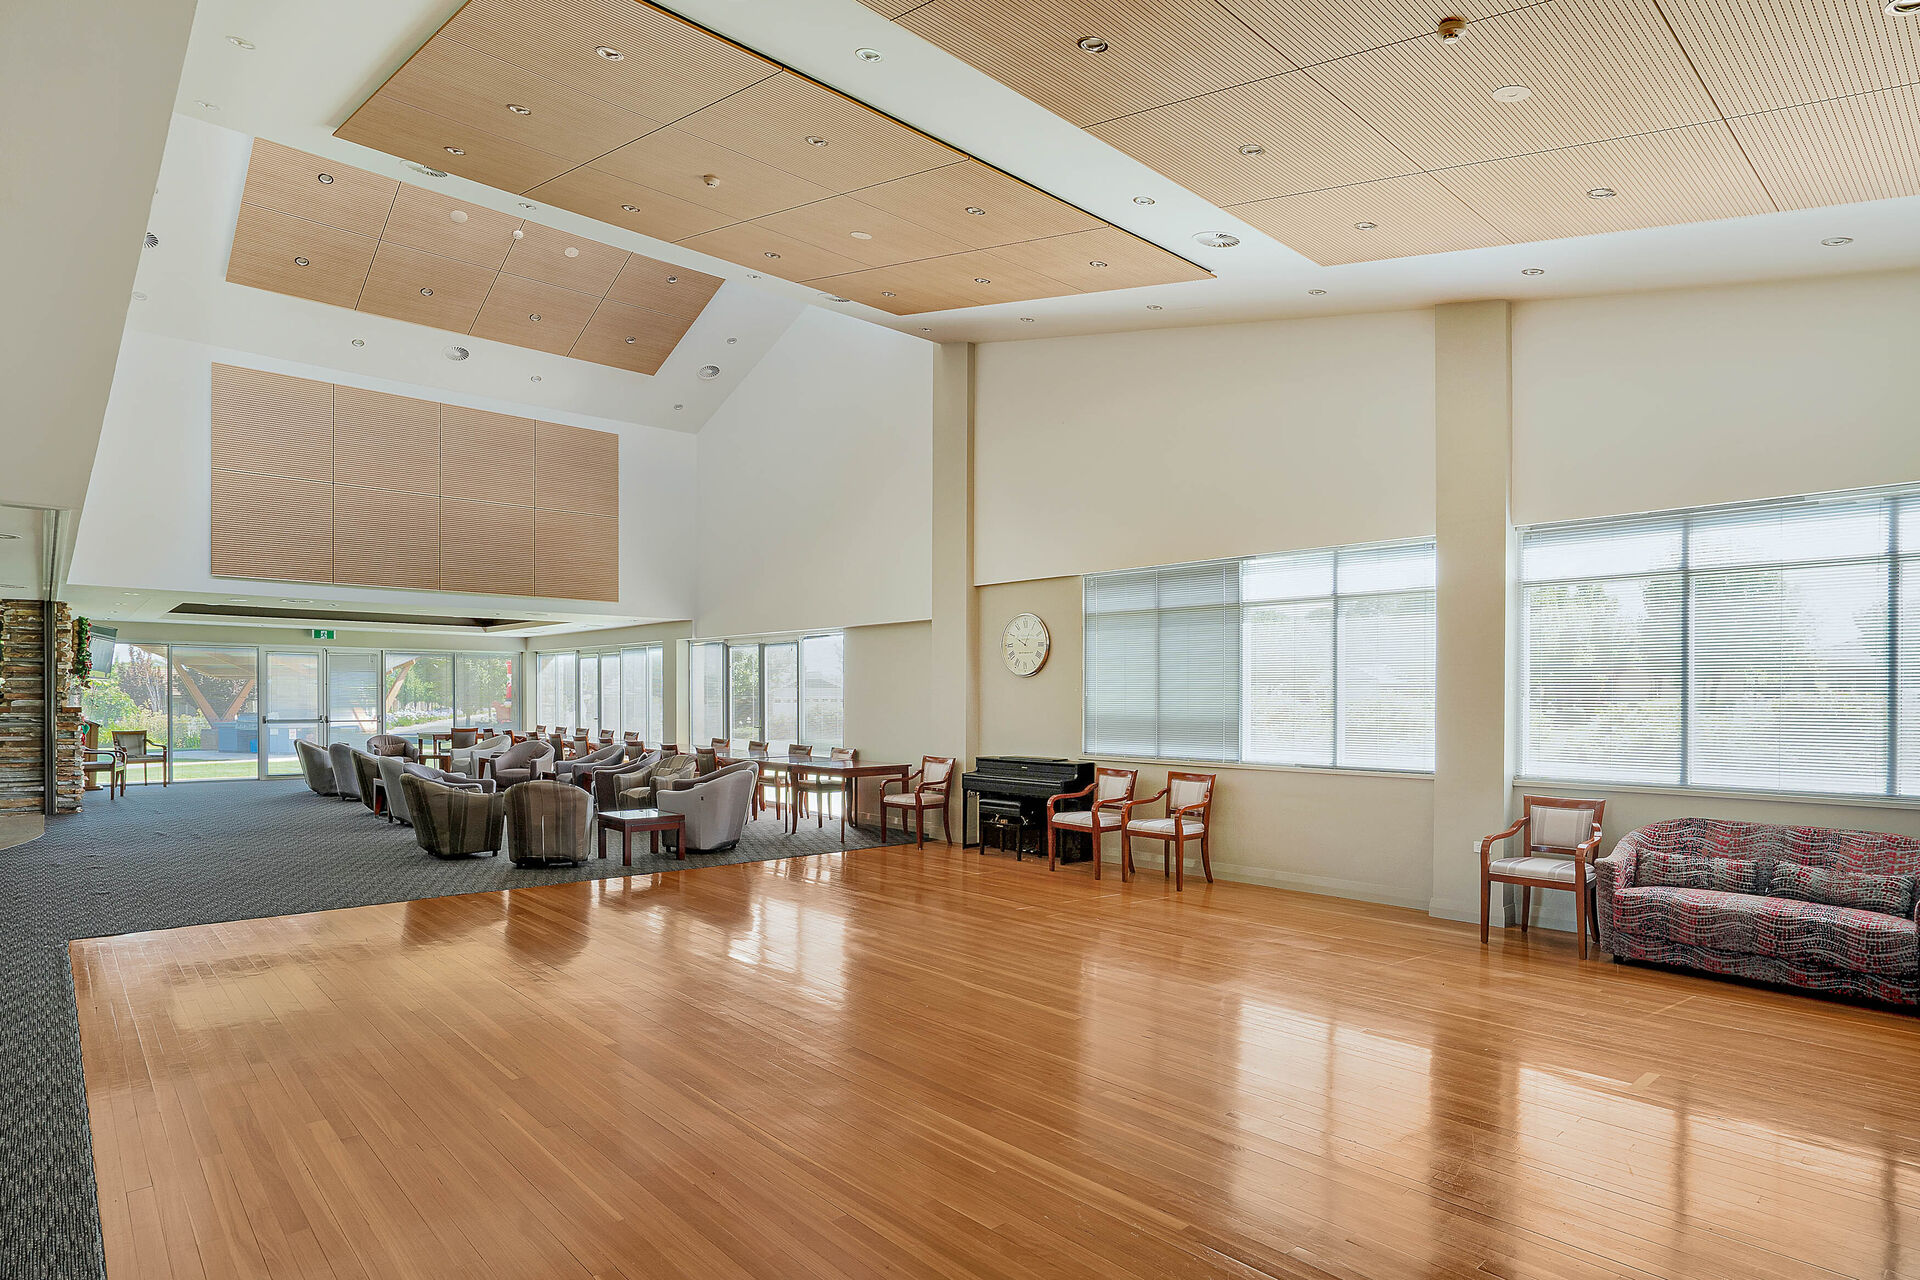 spacious interior of the community centre available for all residents at the over 55s baptistcare the grange retirement village in wagga wagga